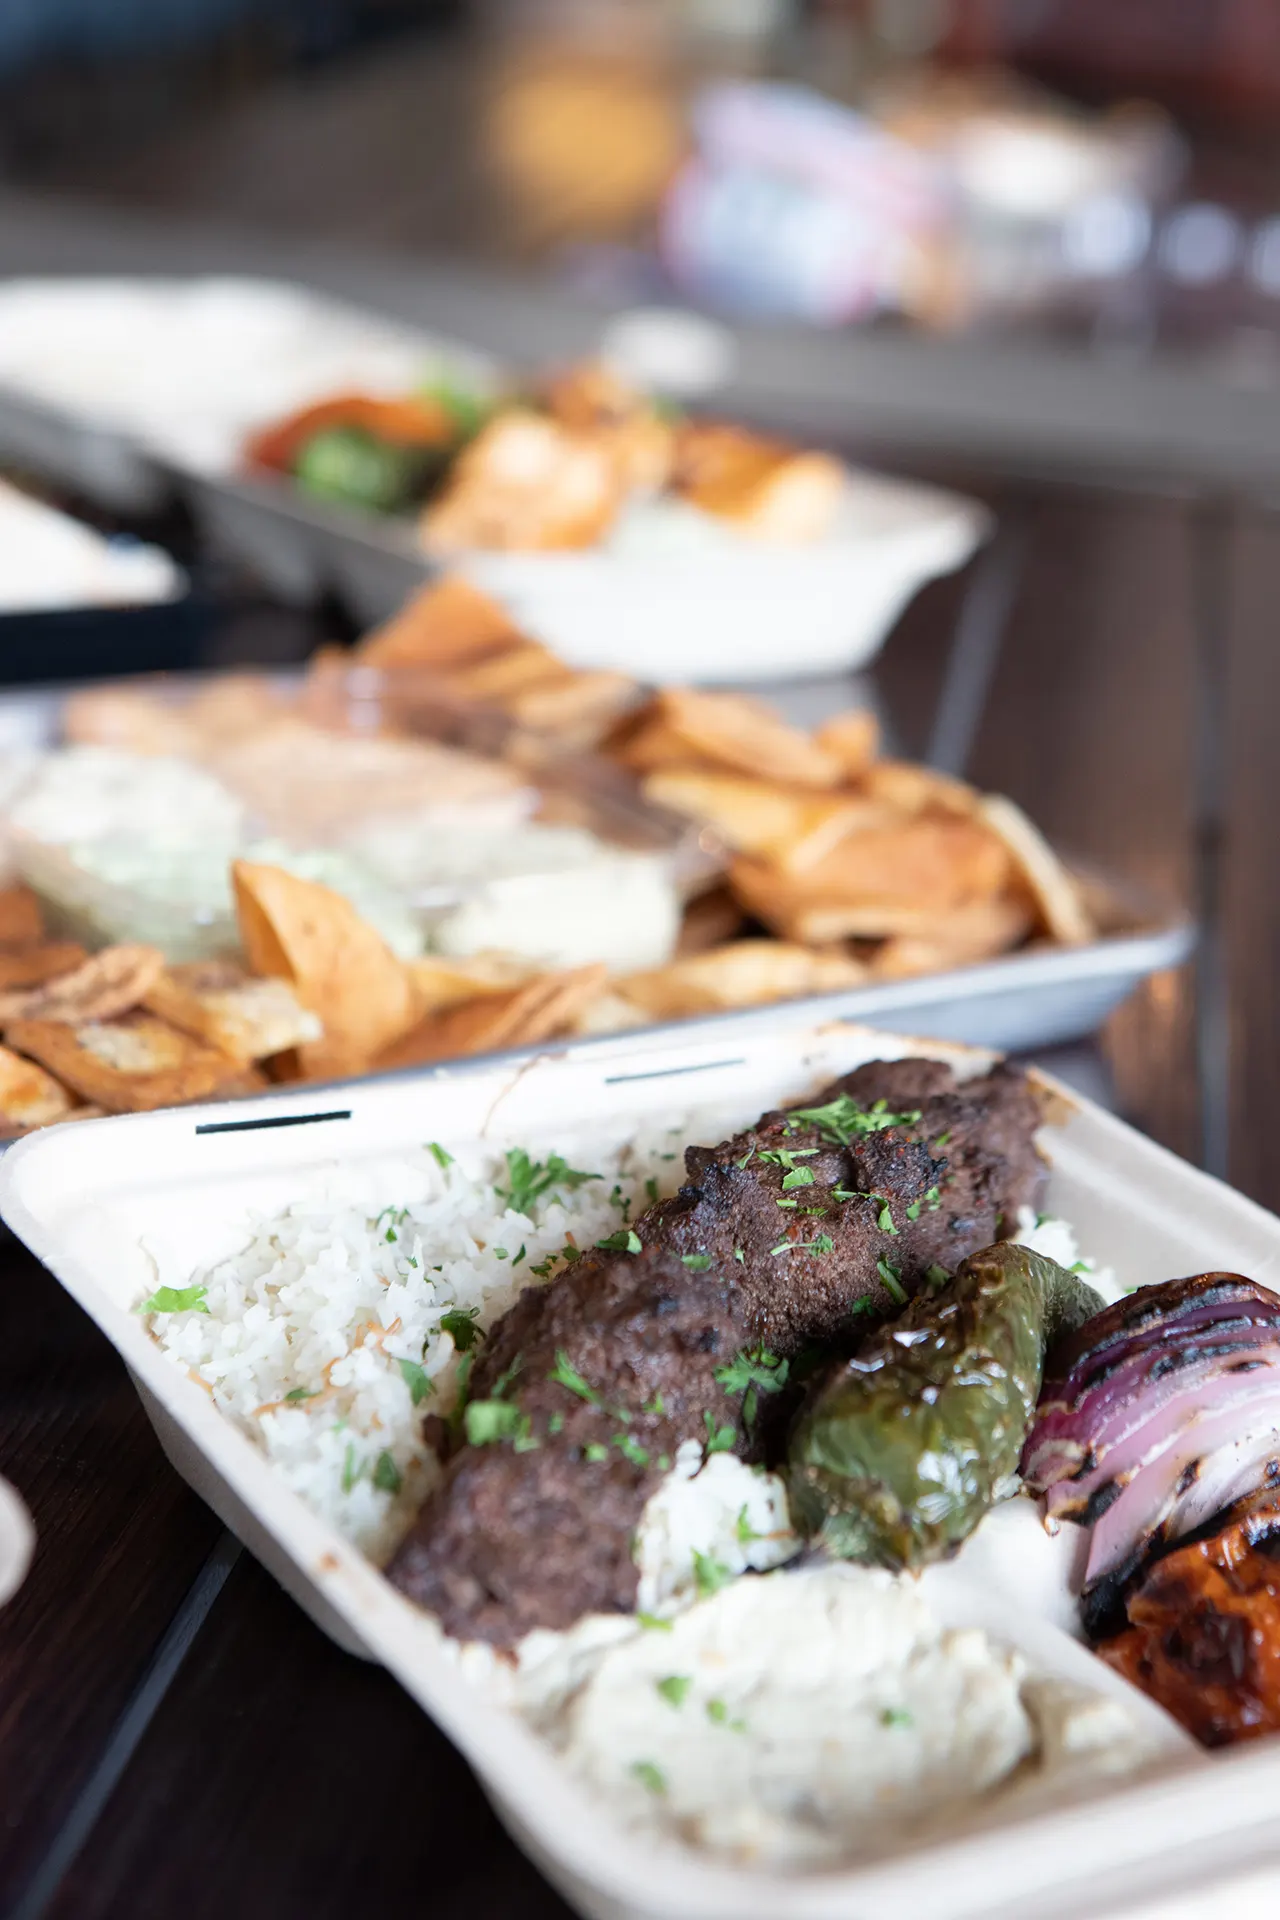 A Beef Kafta Kabob platter is placed in the foreground on a black metallic table. The Beef Kafta Kabob platter is served on a bed or rice, accompanied by classic hummus, and grilled vegetable sides. In the background there is Beef Kafta Platter accompanied by a Chicken Kabob platter and a Party Pack served with Classic Hummus, Cilantro Jalapeño Hummus, Roasted Tomato Habanero Hummus, and Cumin Lime Hummus. The Hummus dips are surrounded by Pita chips.